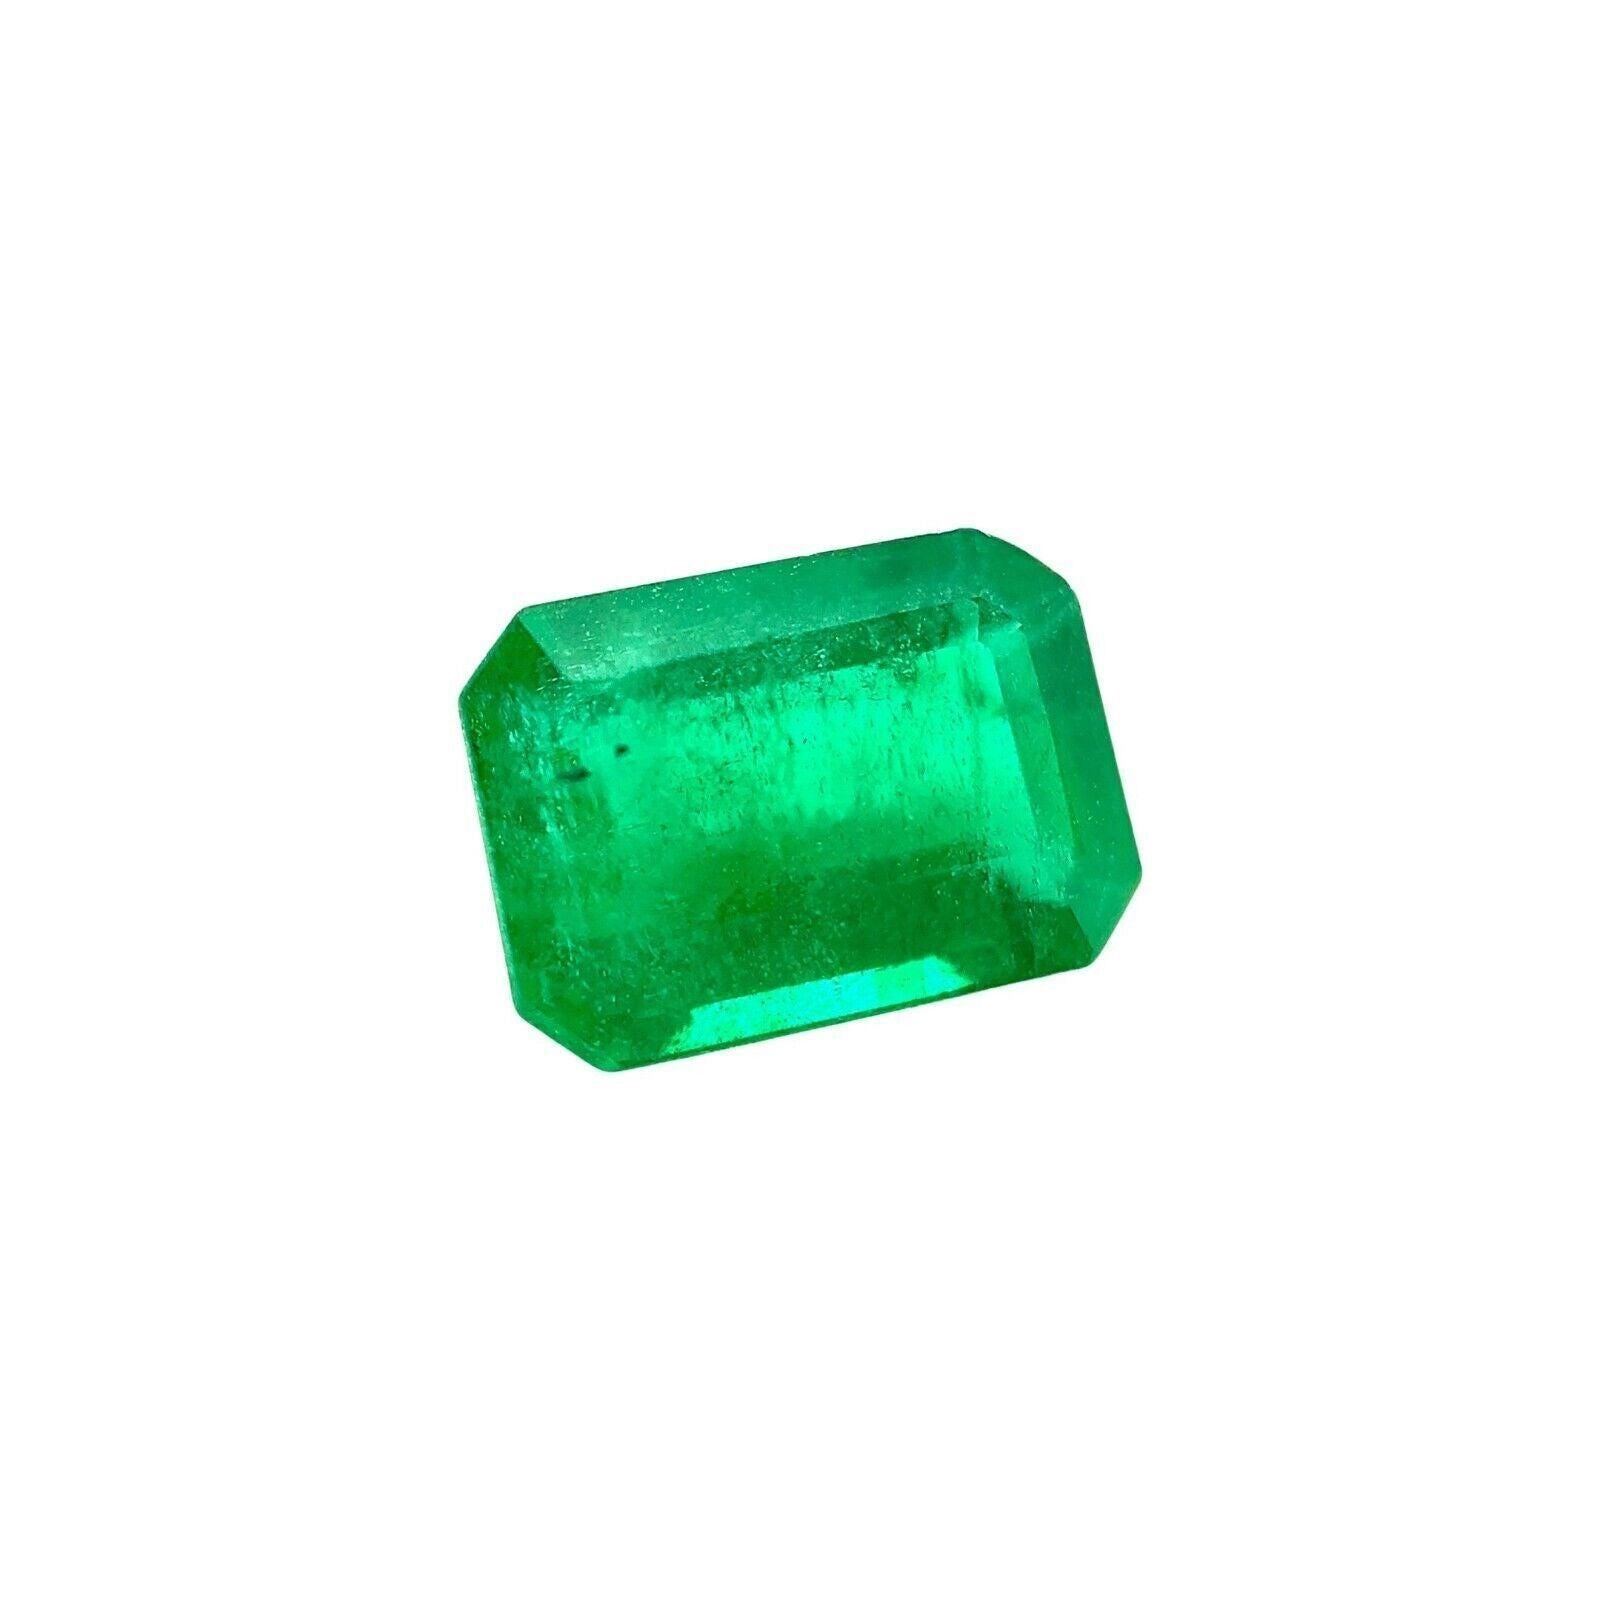 Natural 1.78Ct Rare Deep Green Octagon Cut Emerald Loose Gemstone

Natural Deep Green Emerald Gemstone.
1.78 Carat emerald with a beautiful deep green colour. Also has very good clarity, a clean stone. Emeralds are typically highly included stones